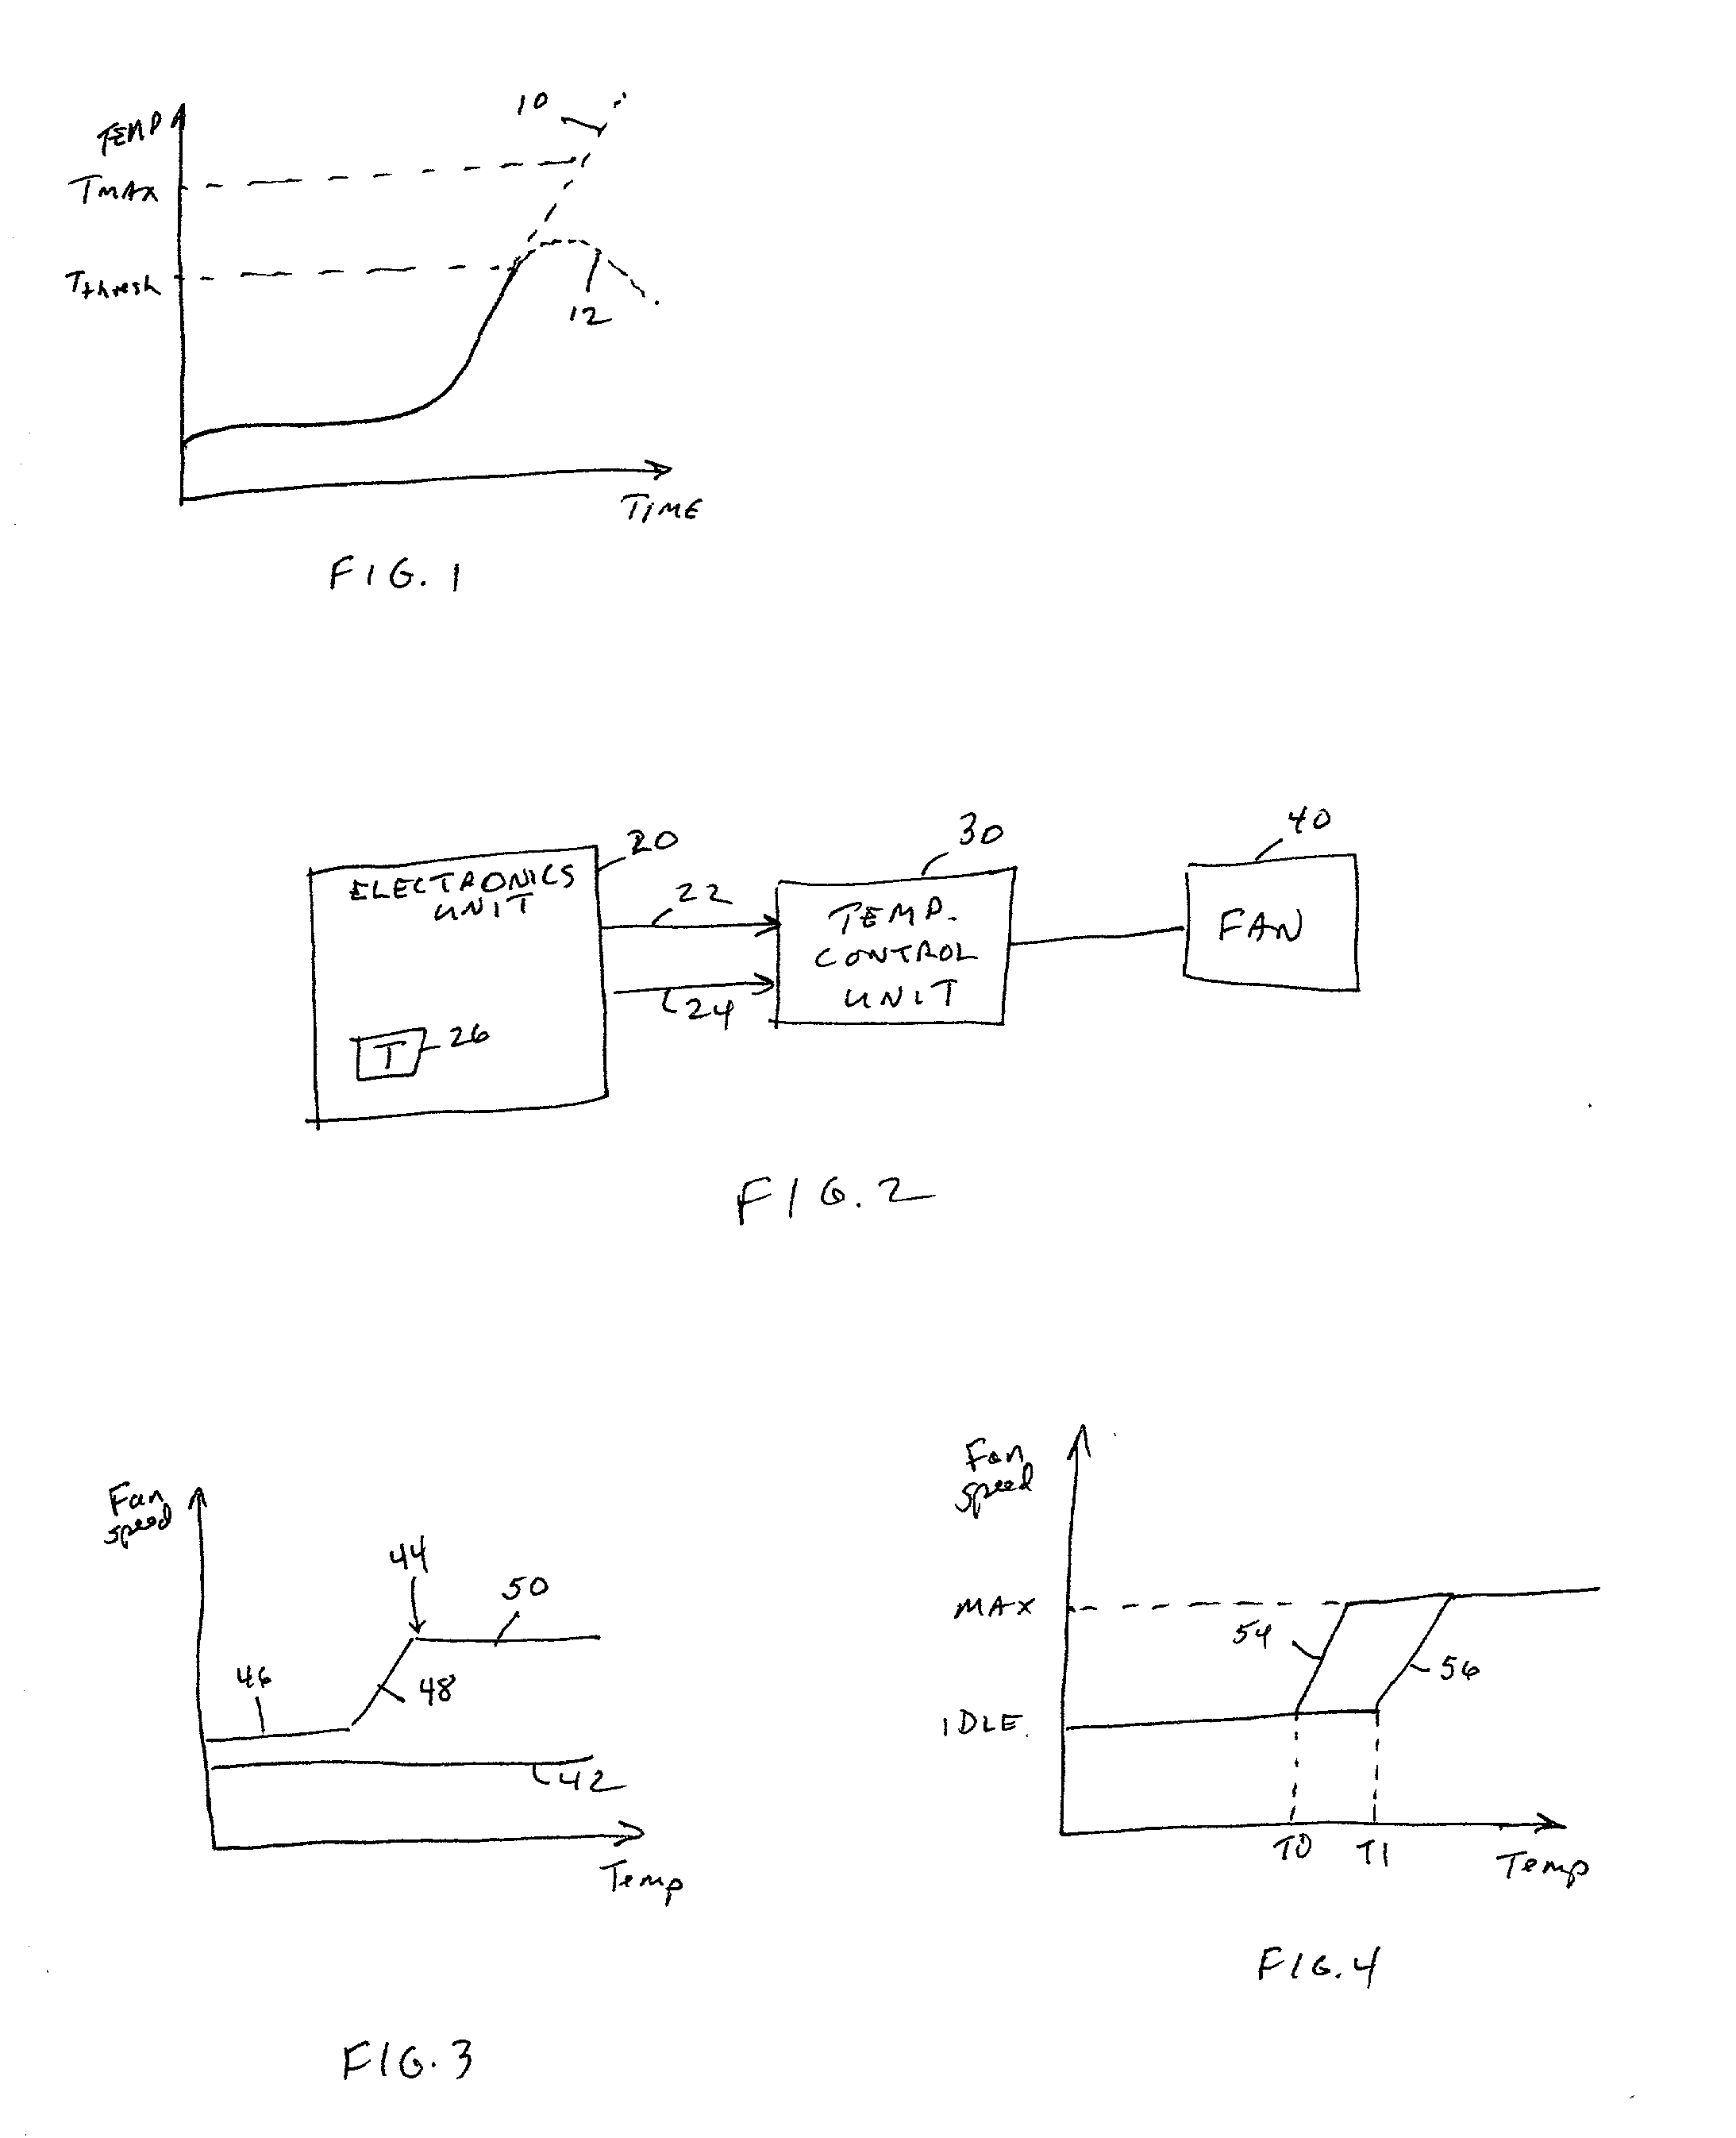 Adaptive fan controller for a computer system